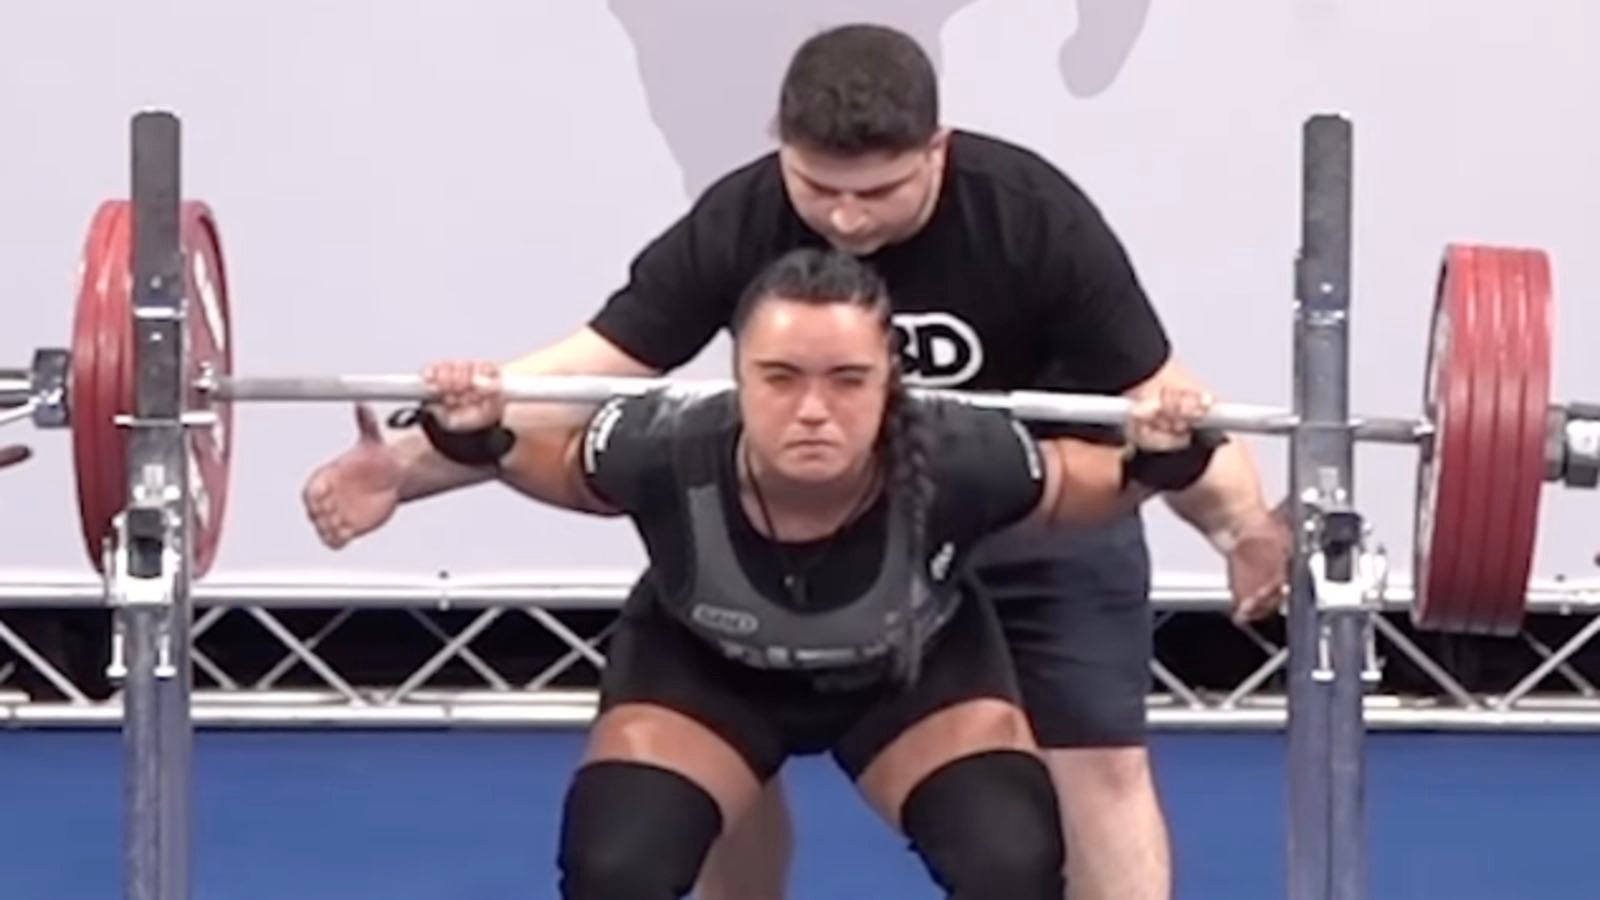 karlina-tongotea-(76kg)-sets-squat-world-record-of-2255-kilograms-(497.1-pounds),-wins-ipf-world-title-–-breaking-muscle